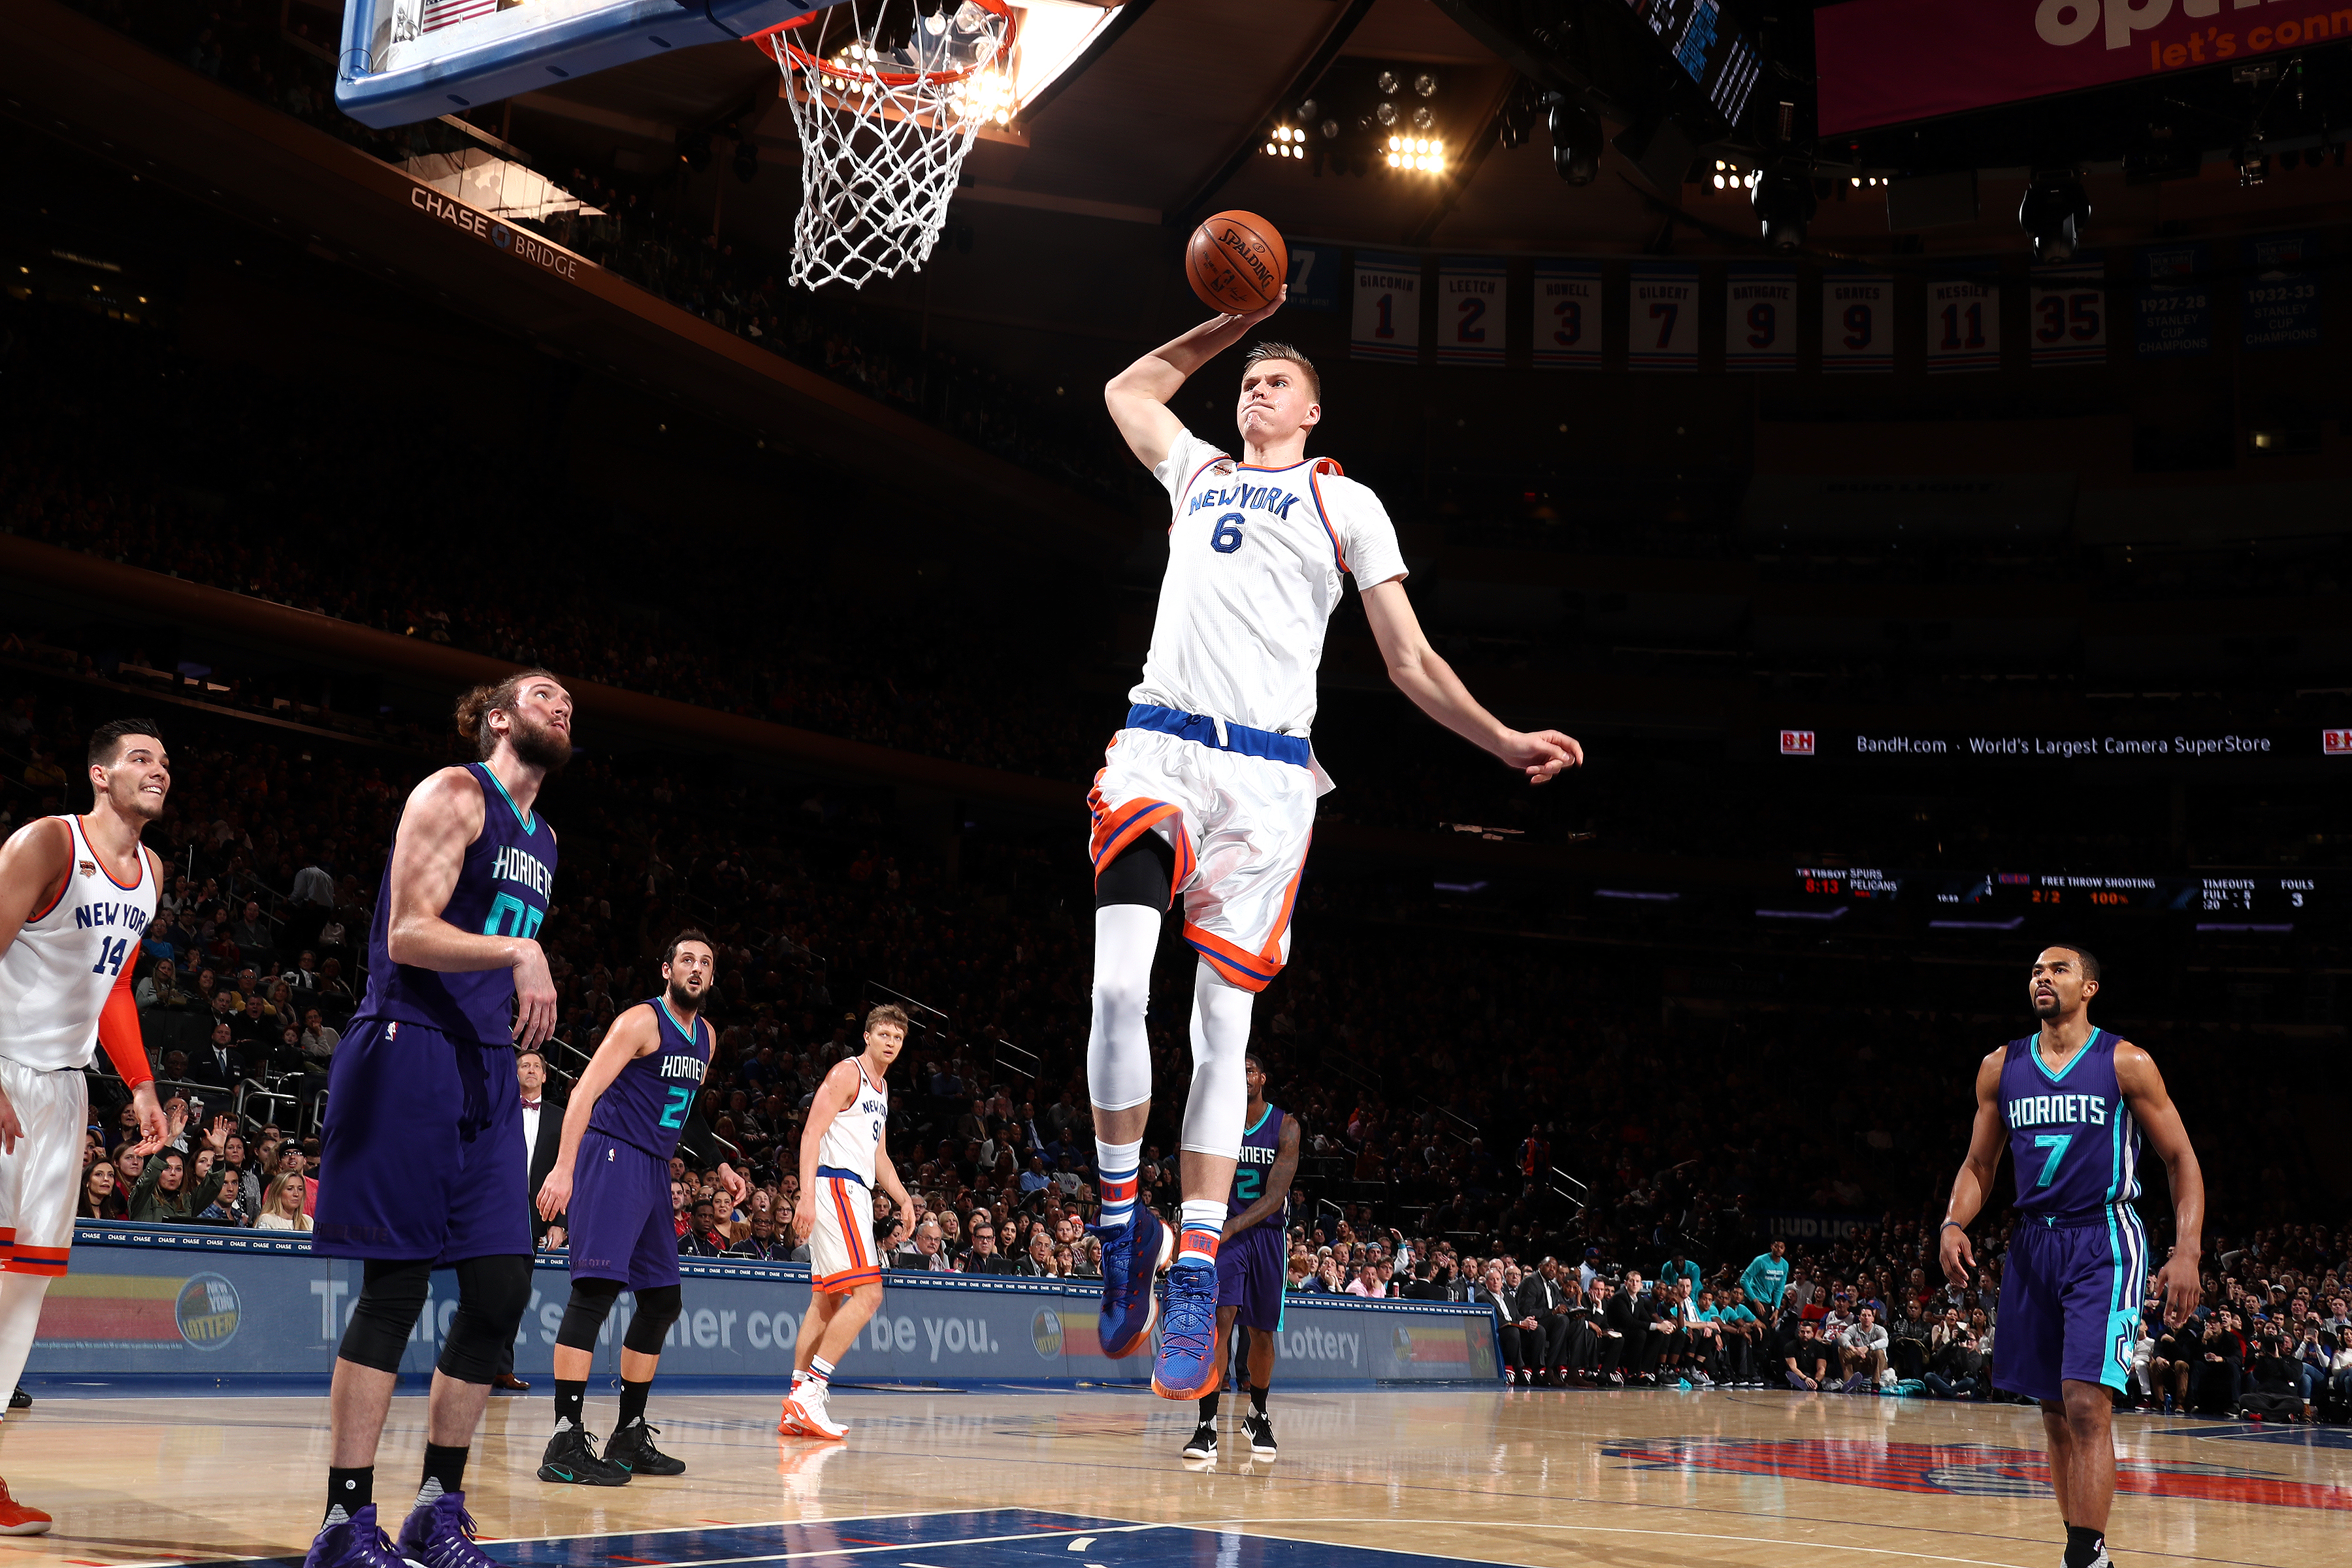 NEW YORK, NY - JANUARY 27: Kristaps Porzingis #6 of the New York Knicks goes for the dunk during the game against the Charlotte Hornets on January 27, 2017 at Madison Square Garden in New York City, New York. NOTE TO USER: User expressly acknowledges and agrees that, by downloading and or using this photograph, User is consenting to the terms and conditions of the Getty Images License Agreement. Mandatory Copyright Notice: Copyright 2017 NBAE (Photo by Nathaniel S. Butler/NBAE via Getty Images)